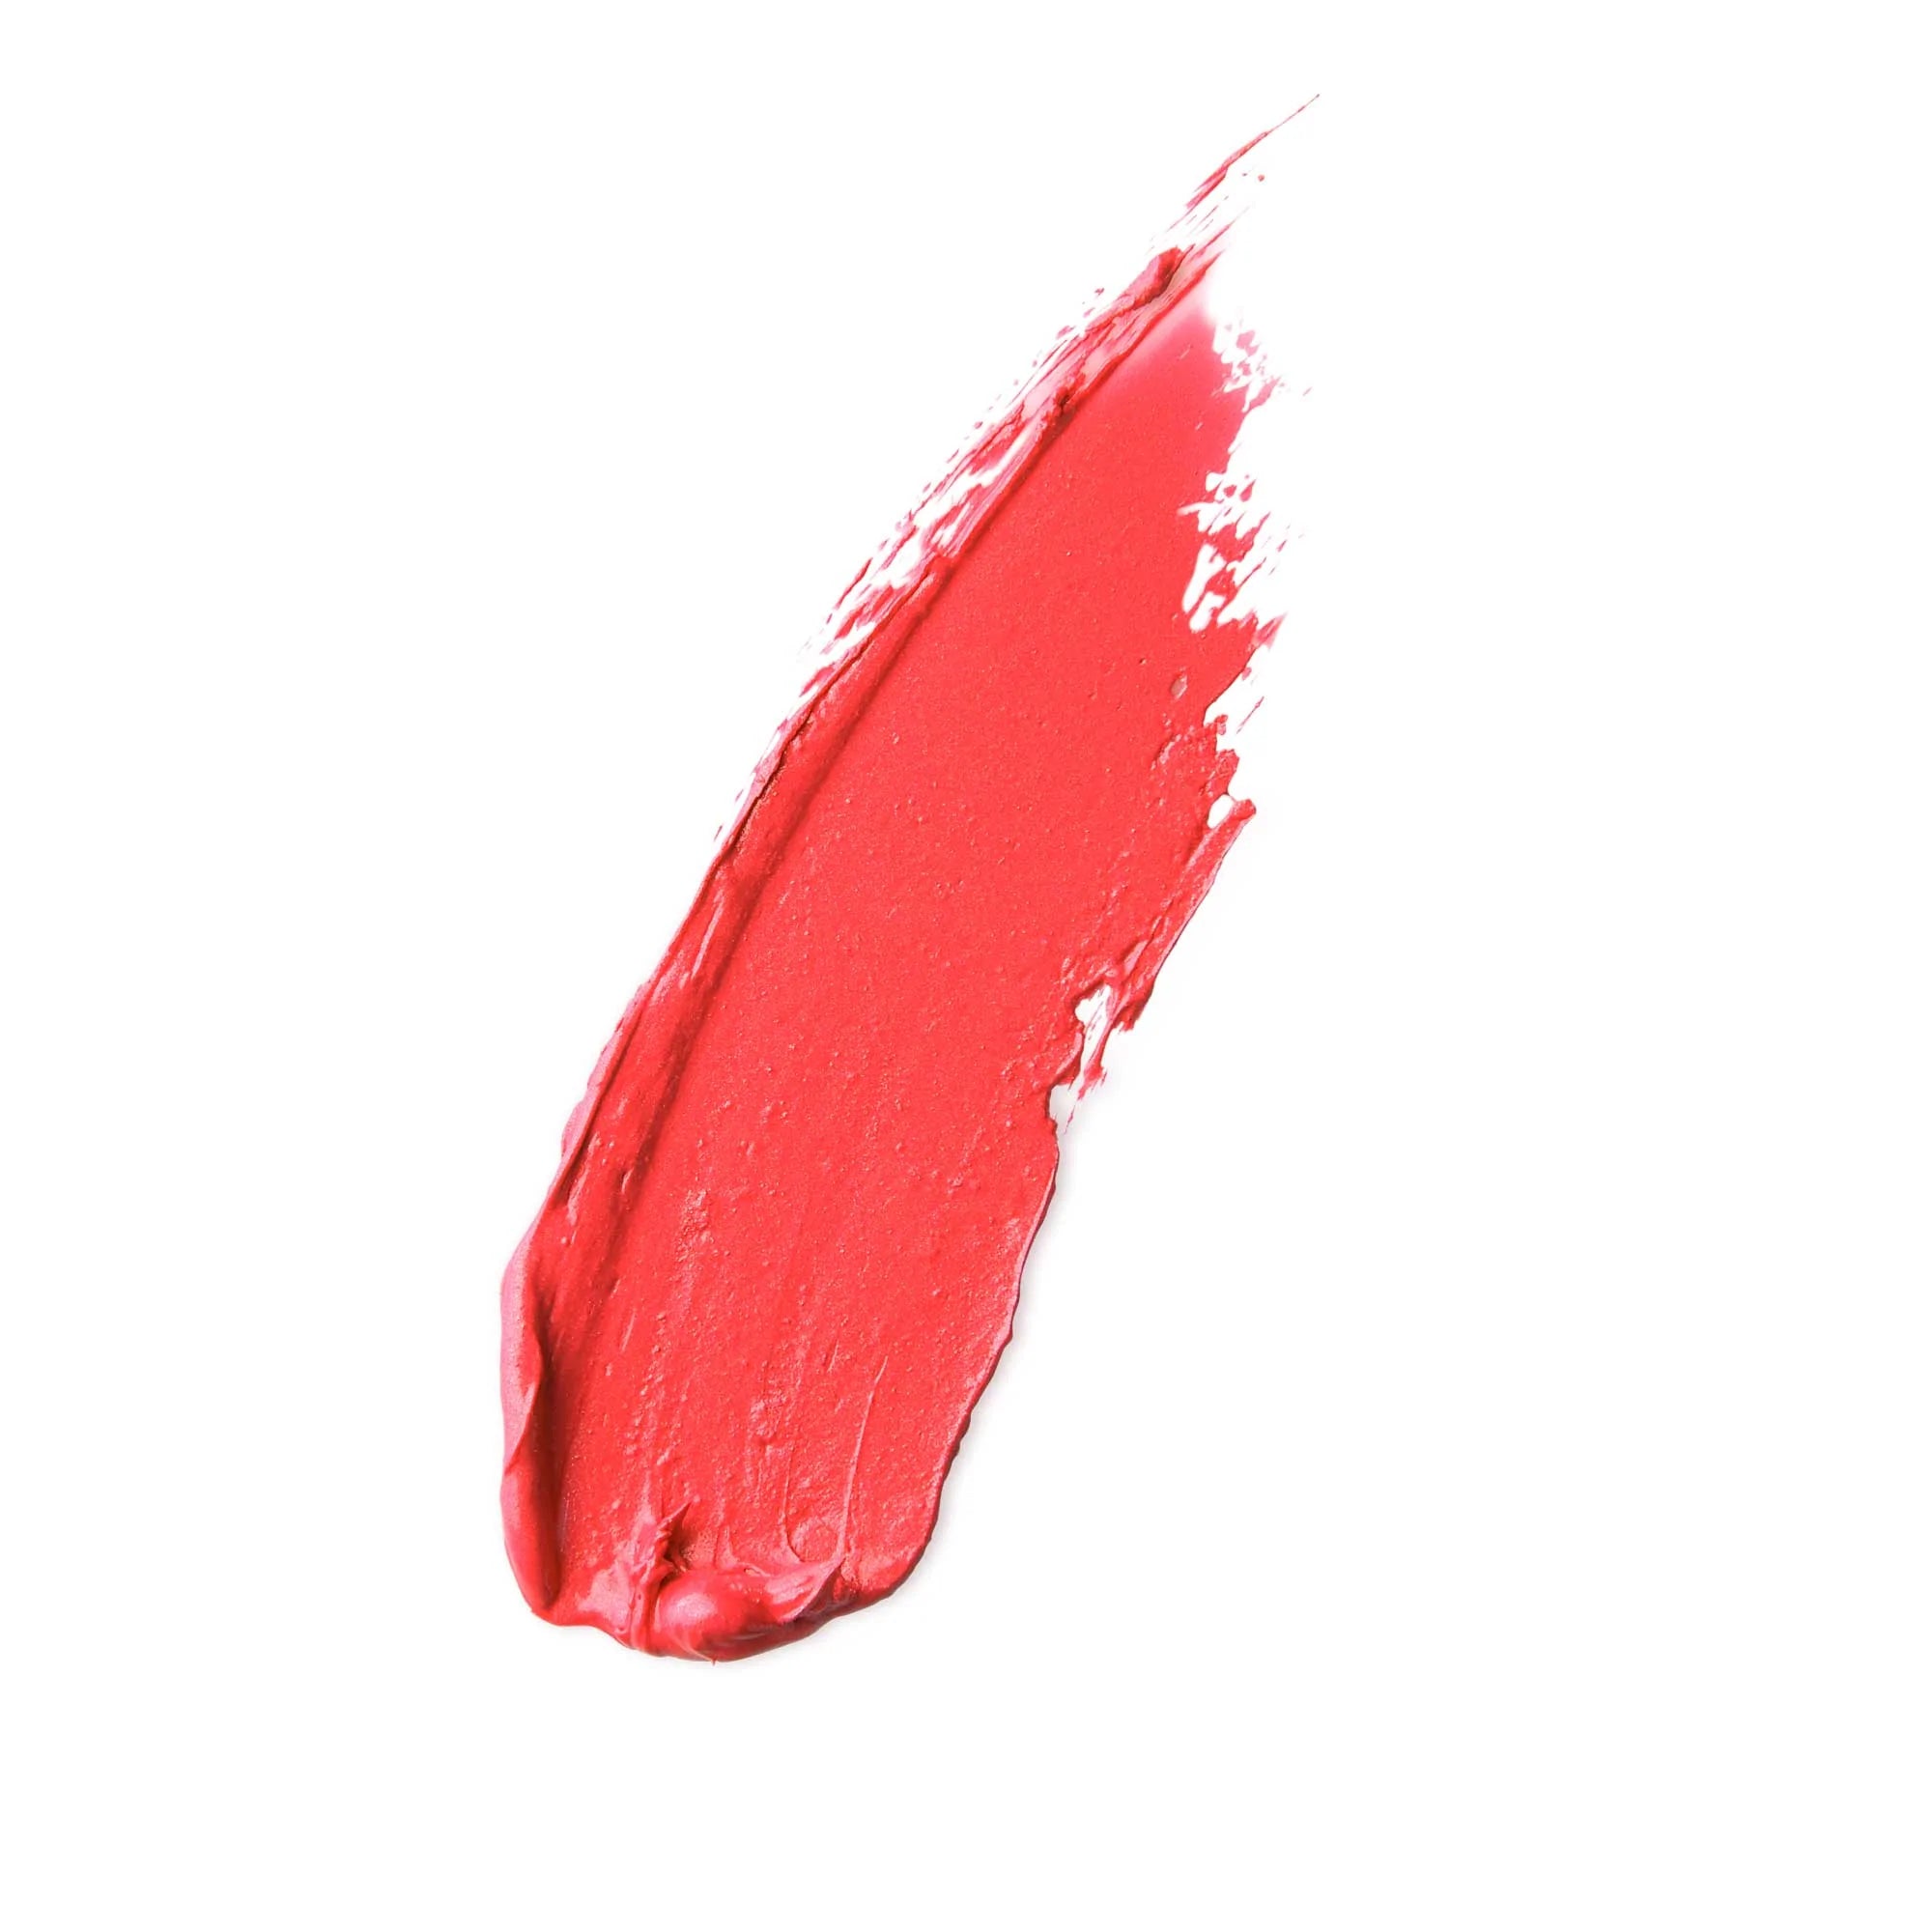 Antipodes West Coast Sunset Moisture-Boost Natural Lipstick 4g-The Living Co.